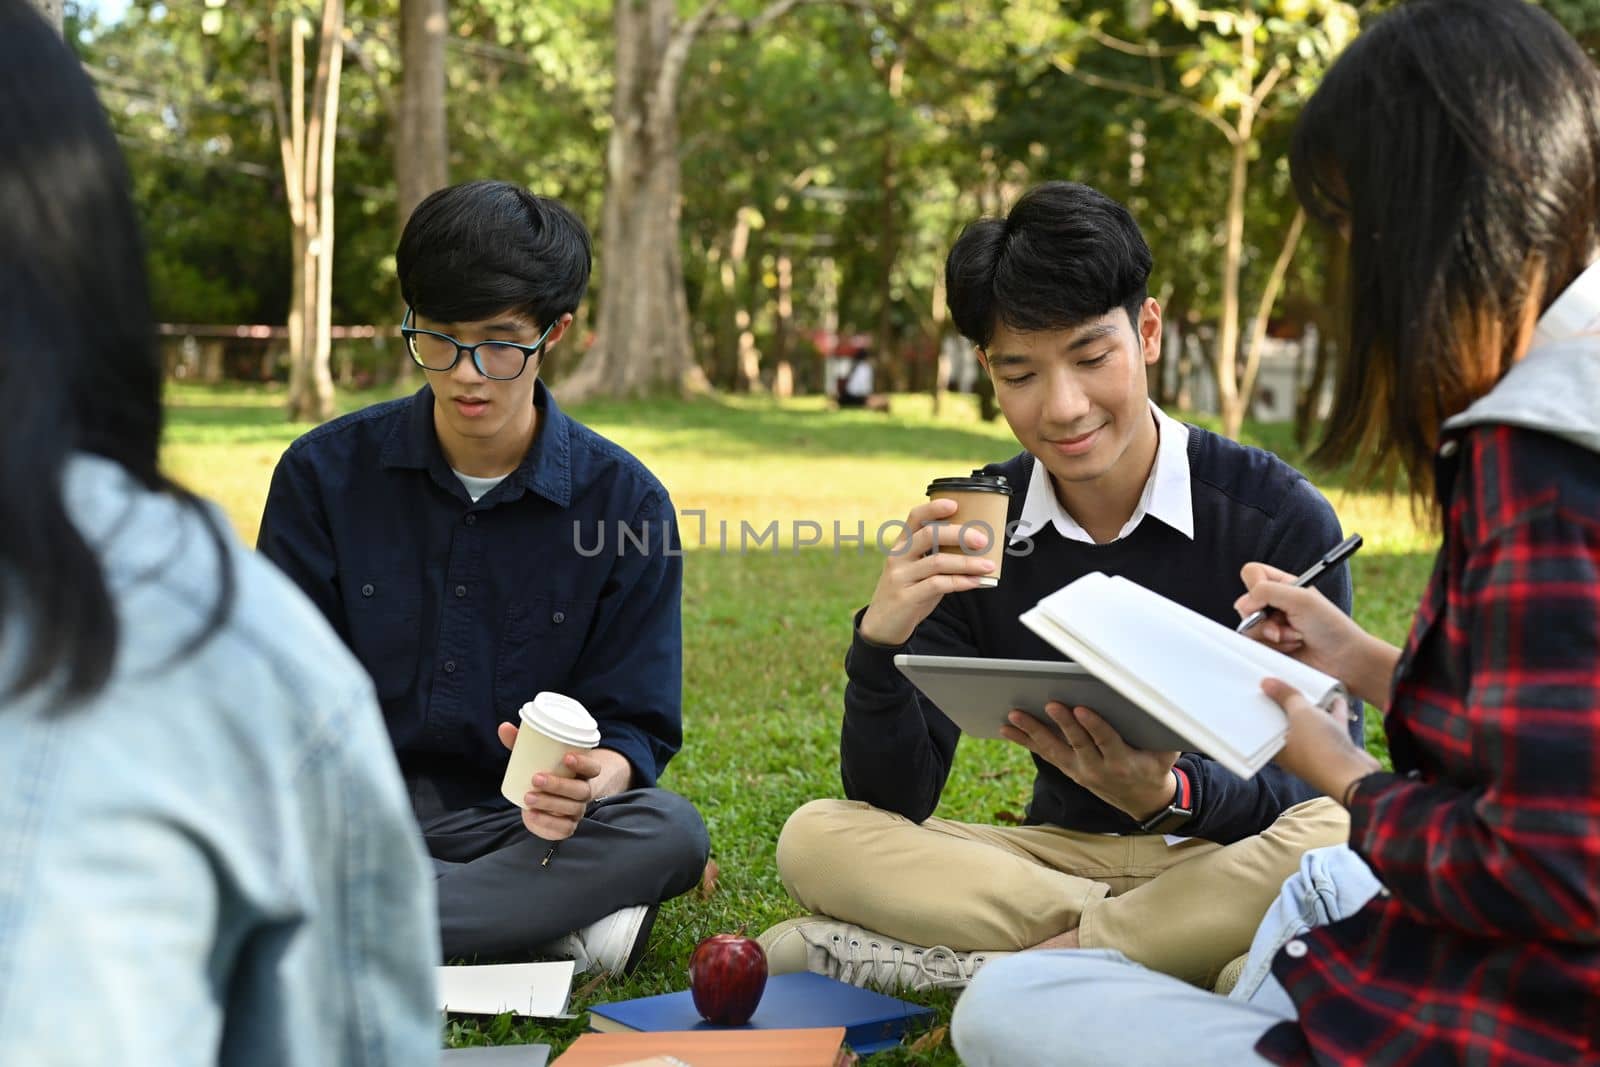 Group of university students talking with and reading book while sitting together on green grass in campus.